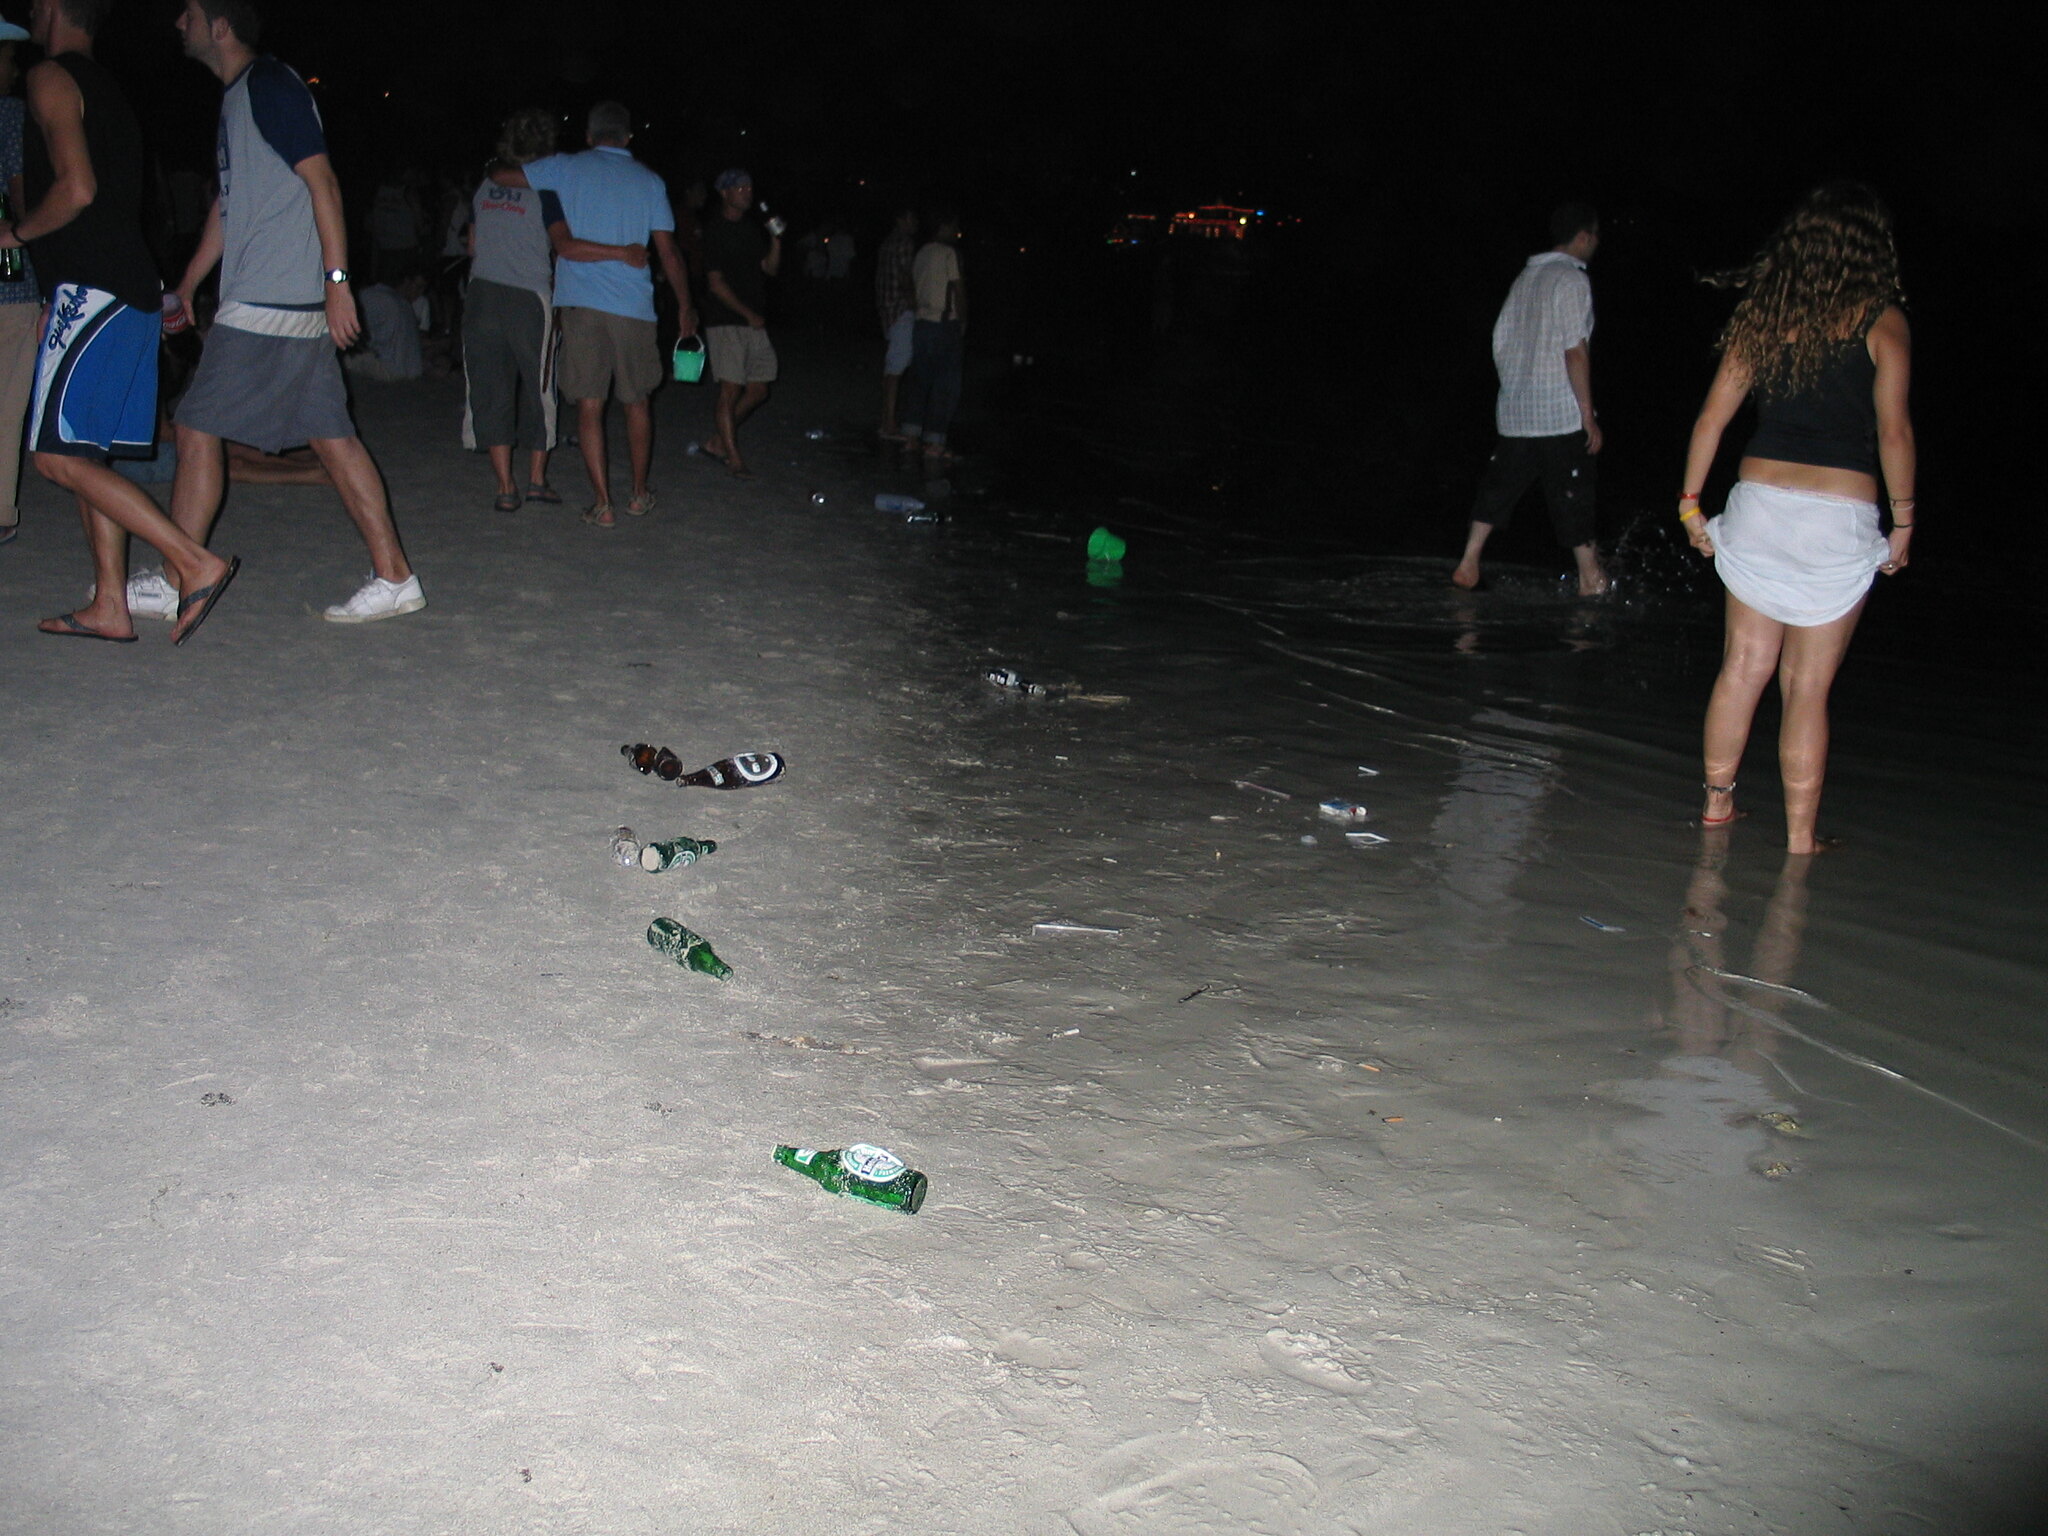 People on a beach at night turn their backs on beer bottles left on the sand.